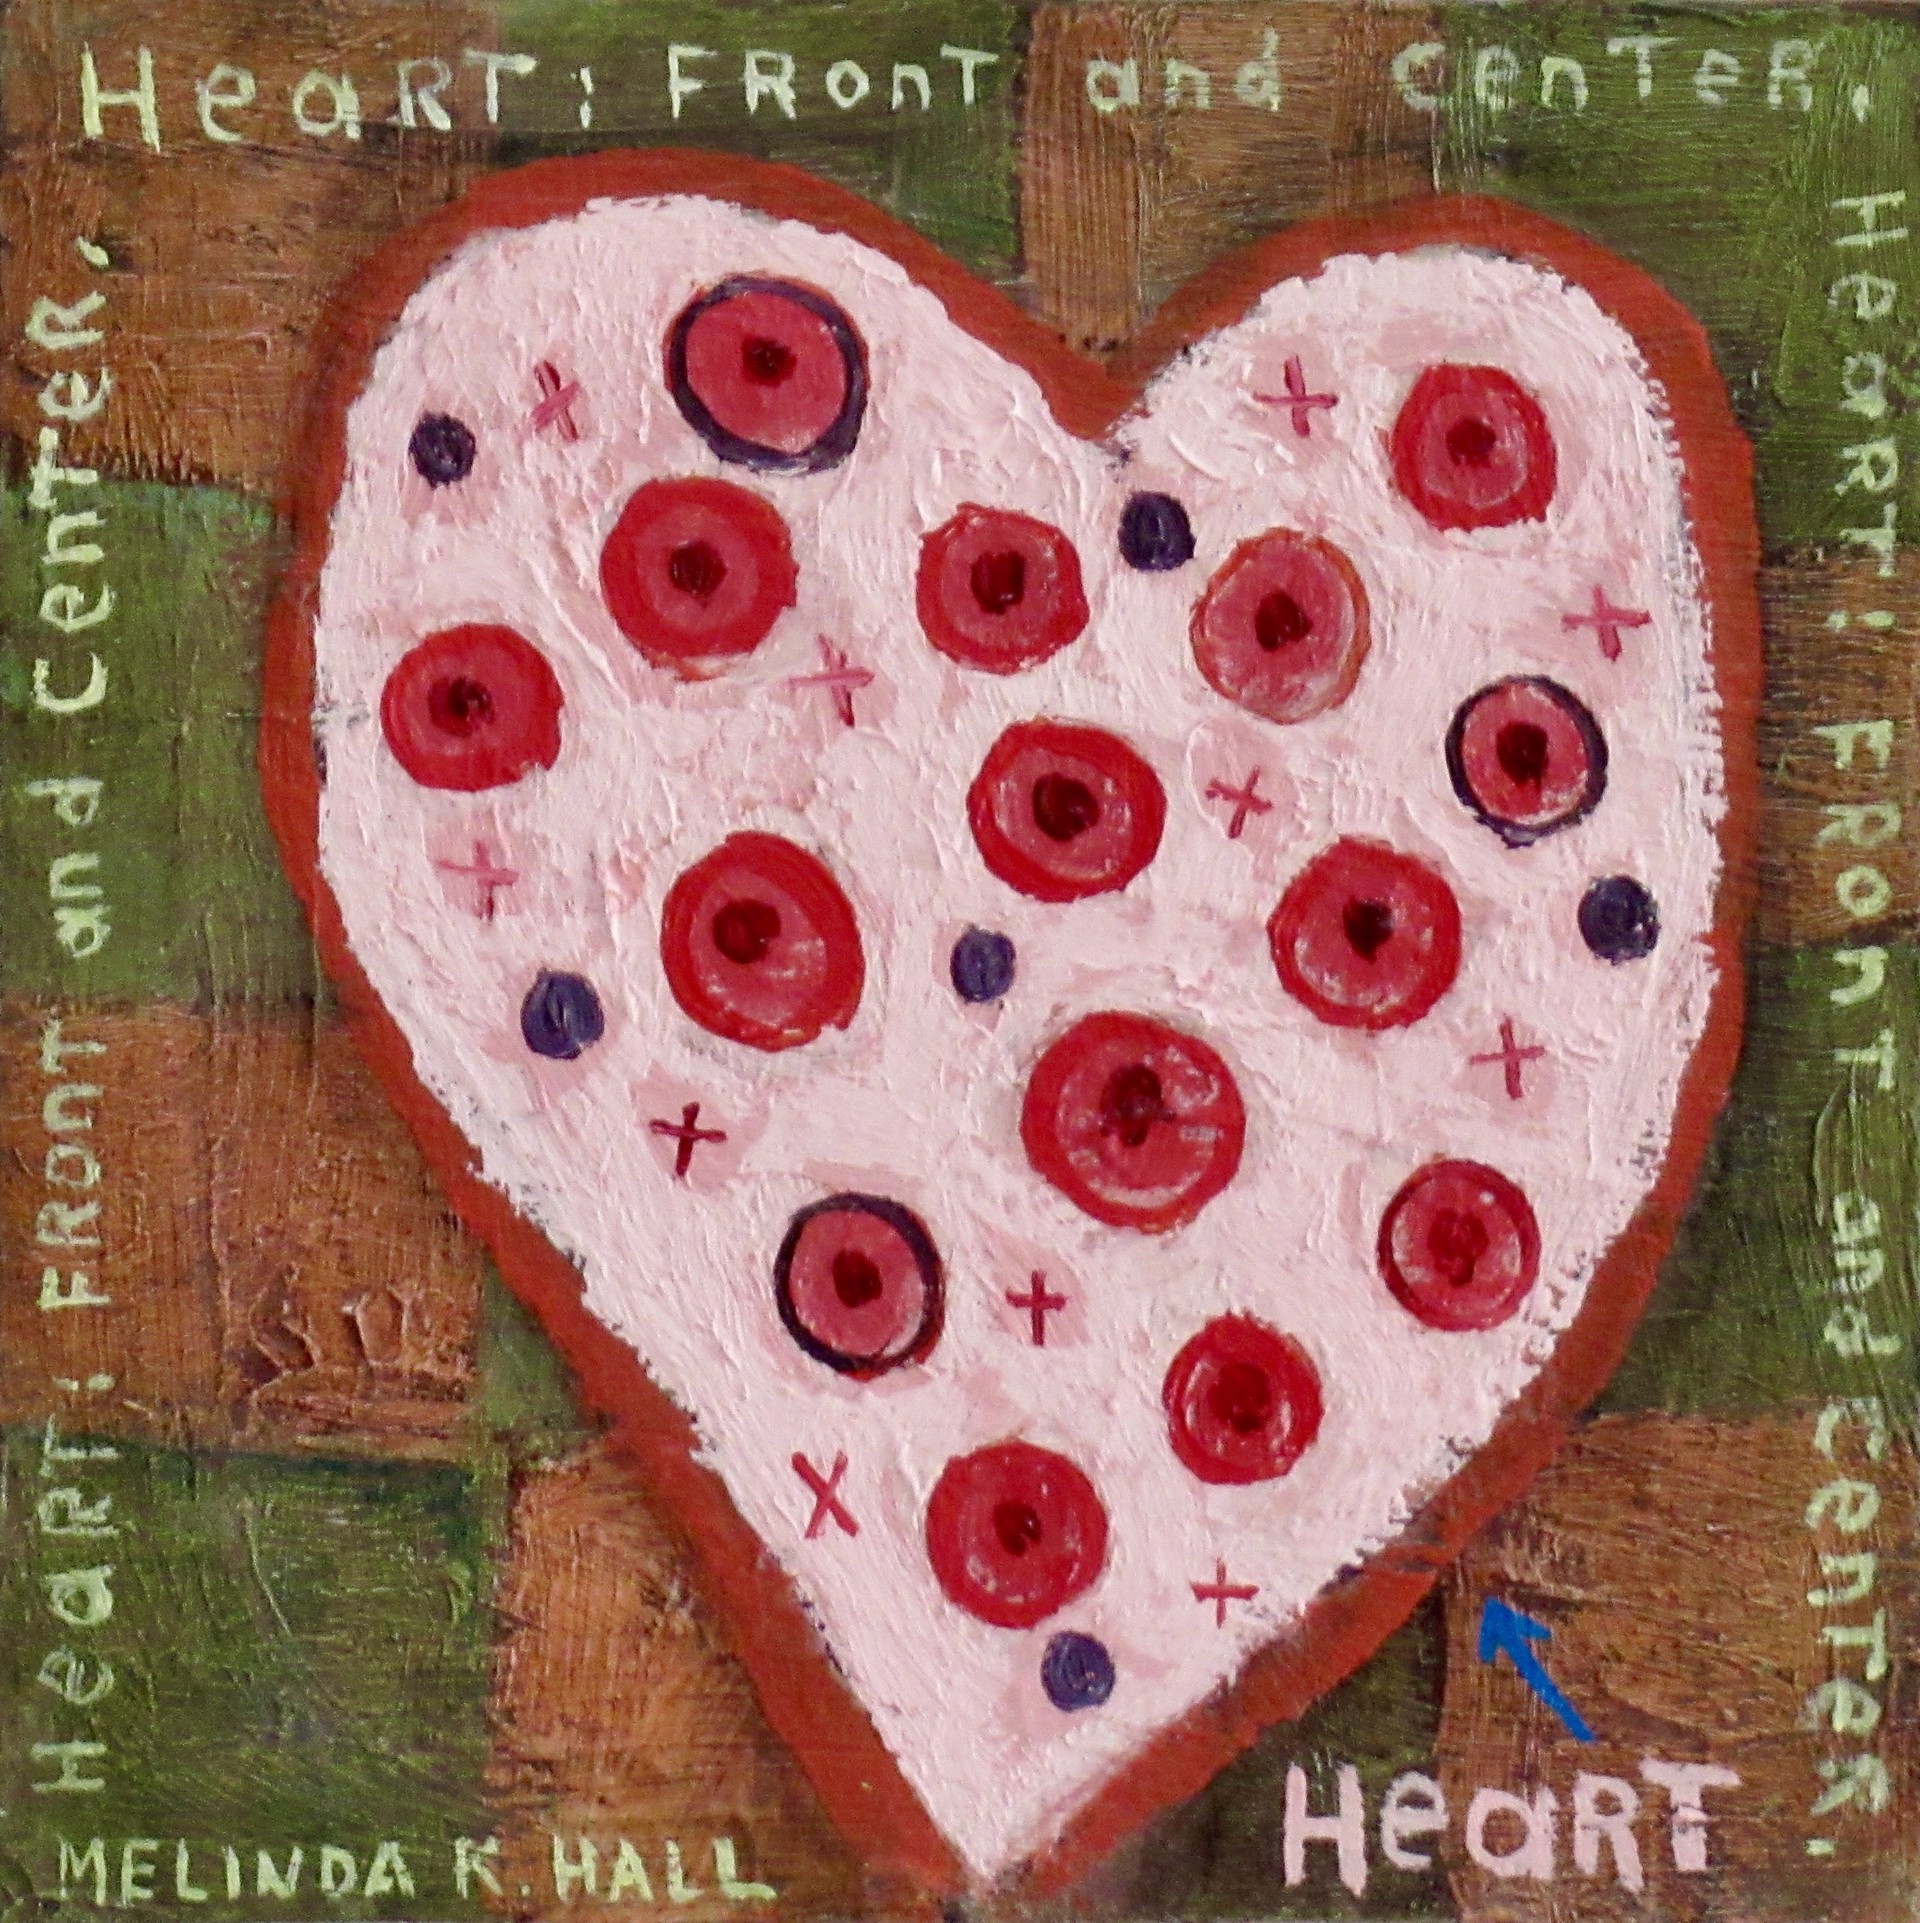 Heart:  Front and Center by Melinda K. Hall